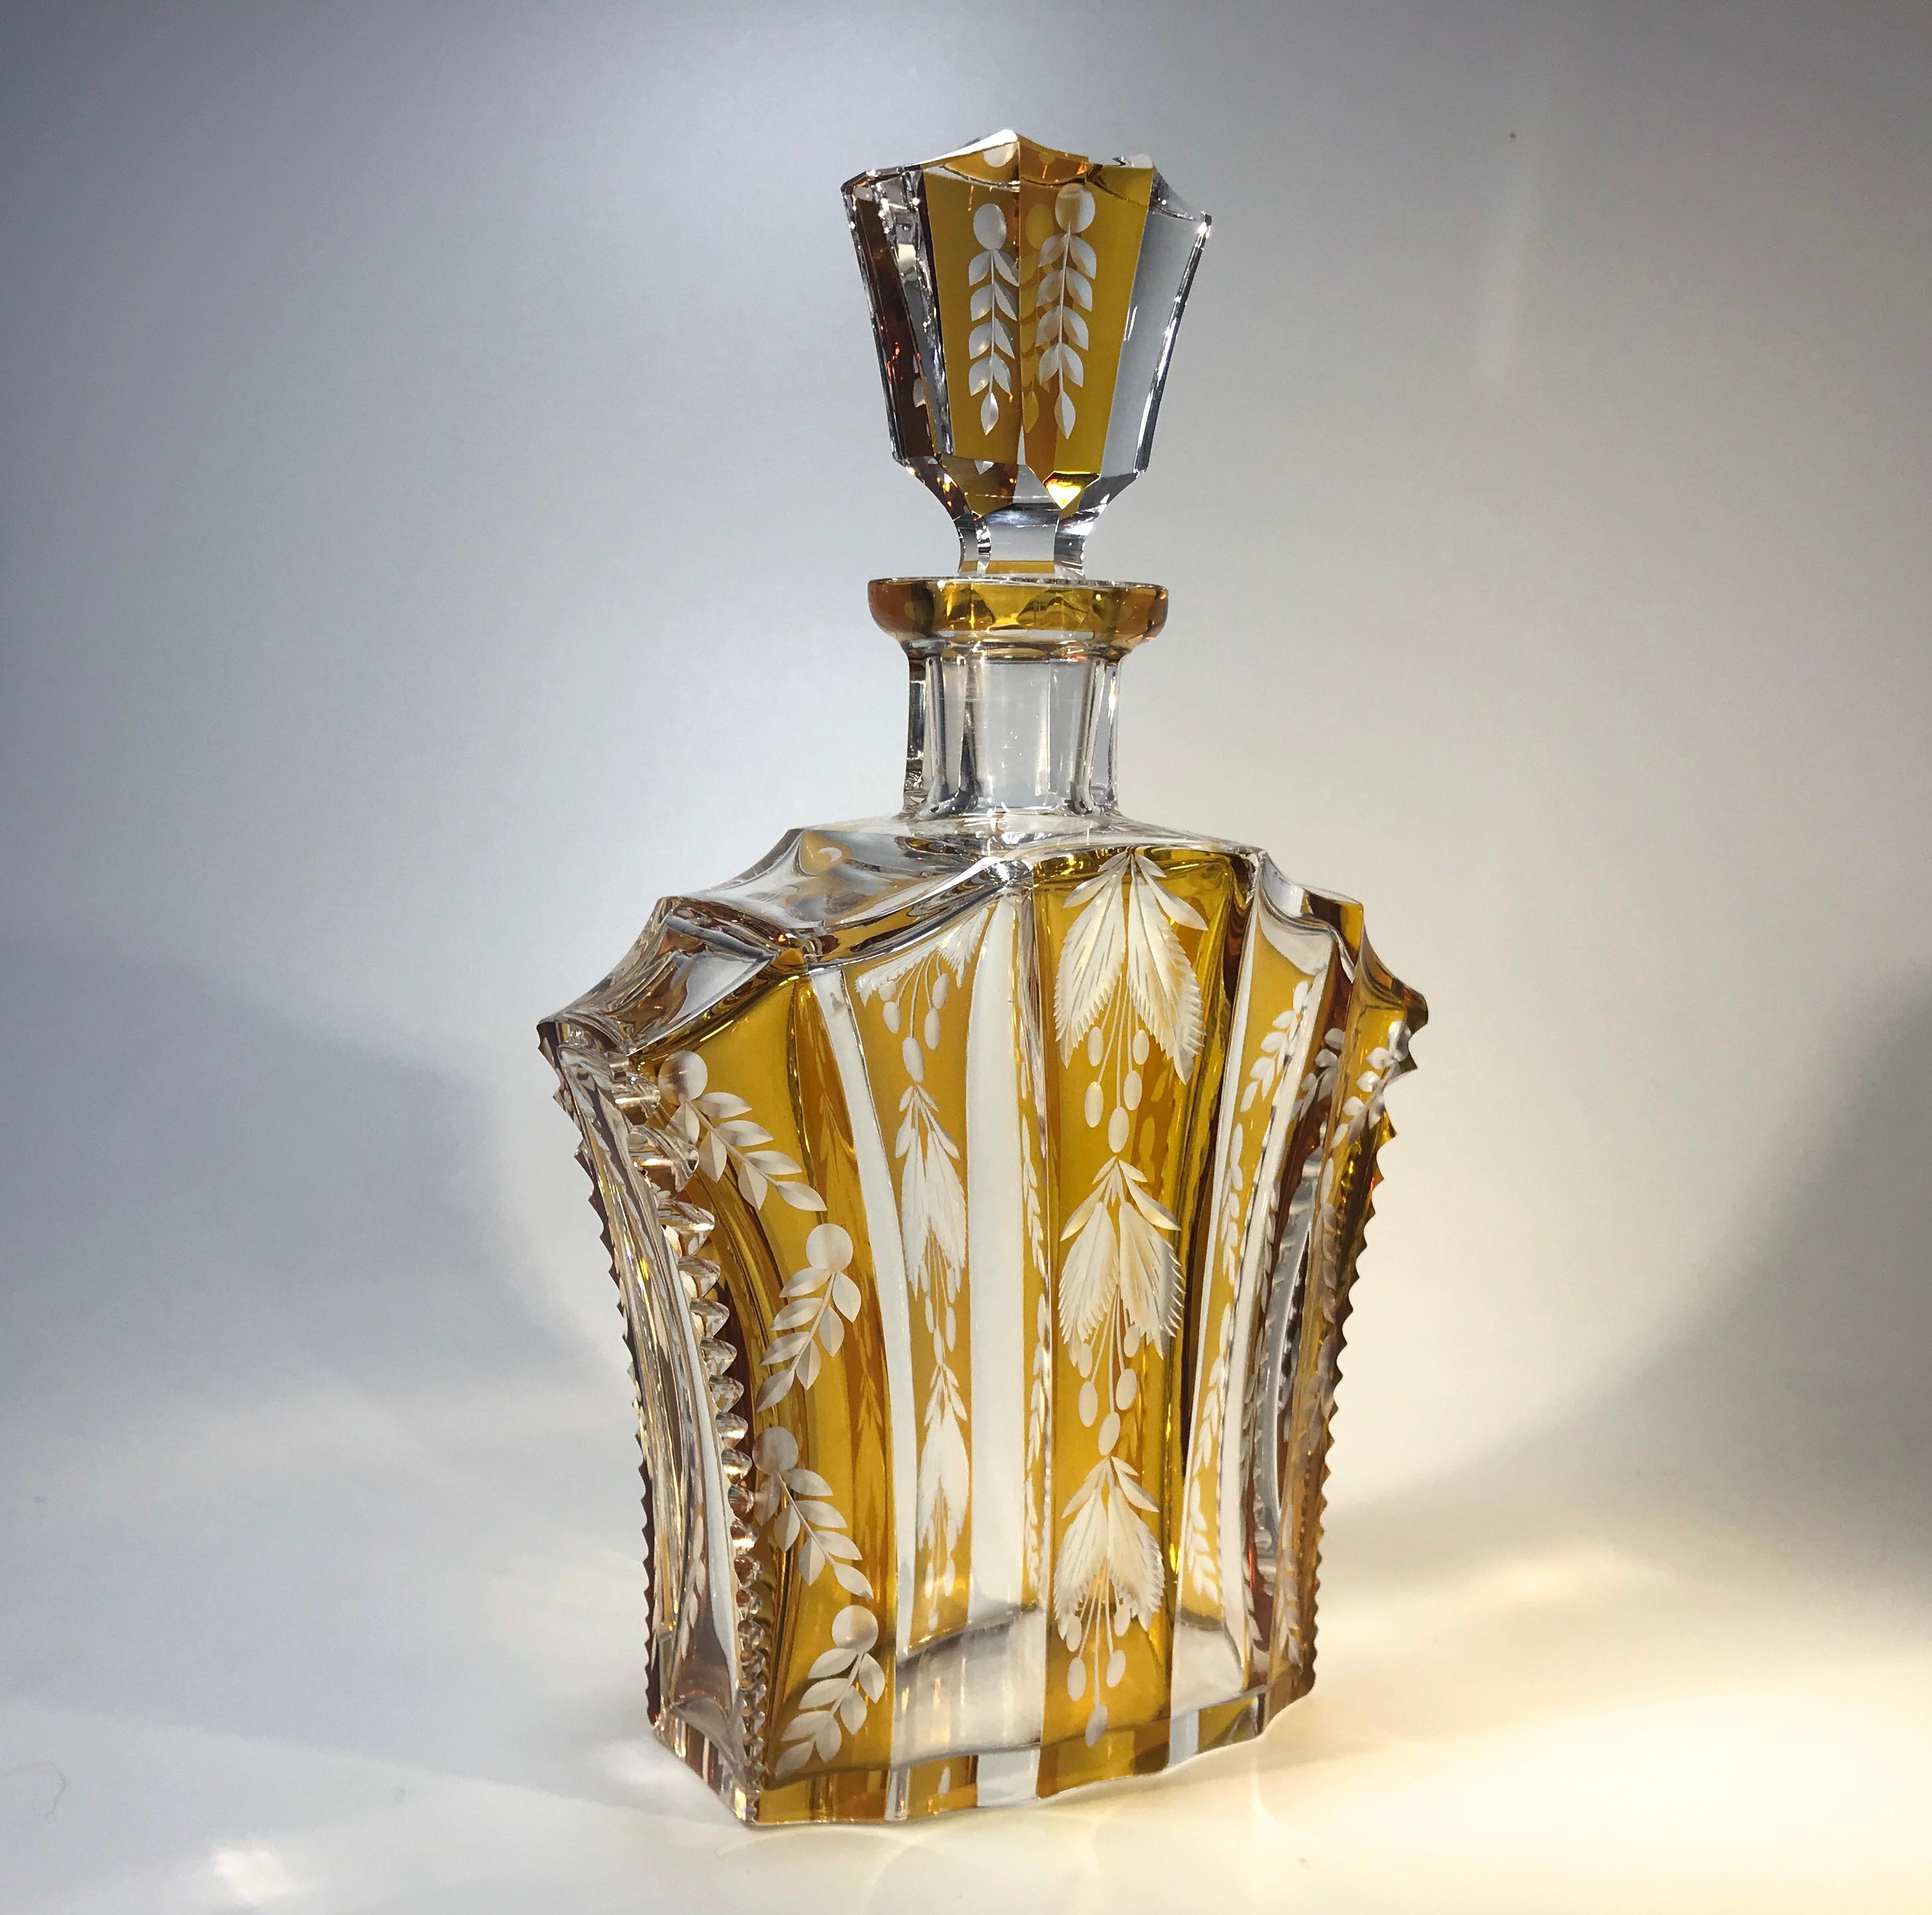 Splendid Bohemian flashed and engraved decanter set from the 1930's
A superbly stylish shaped decanter with faceted stopper, decorated with a rich amber flashed floral pattern
Complete with four petite companion glasses. Each glass holds approx